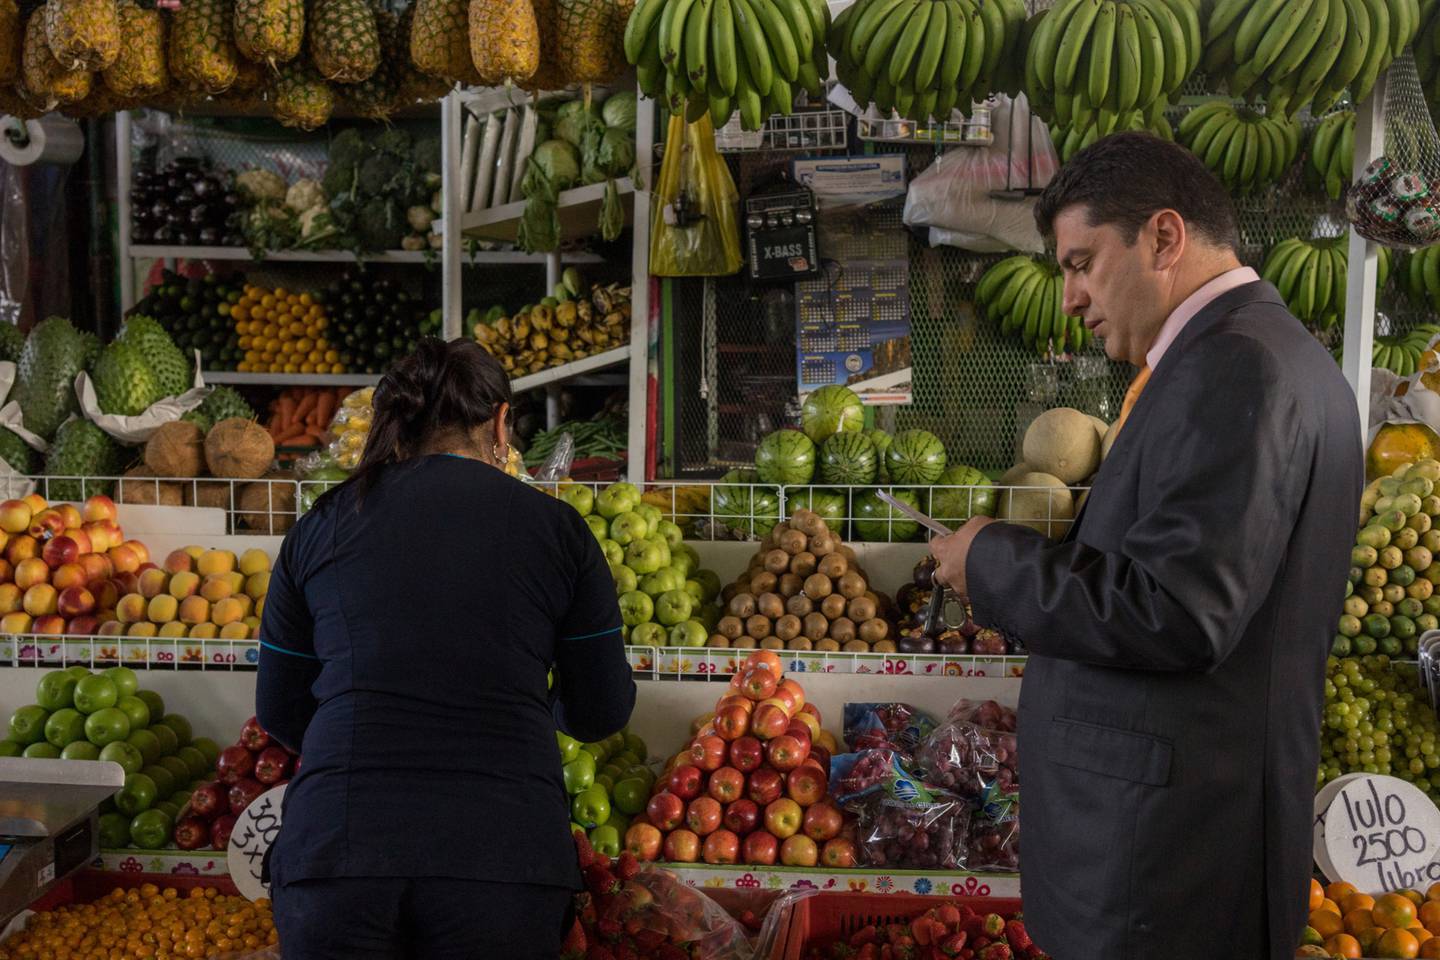 A man studies his shopping list while a vendor selects fruit at Paloquemao market in Bogotá, Colombia, in March 2016.dfd